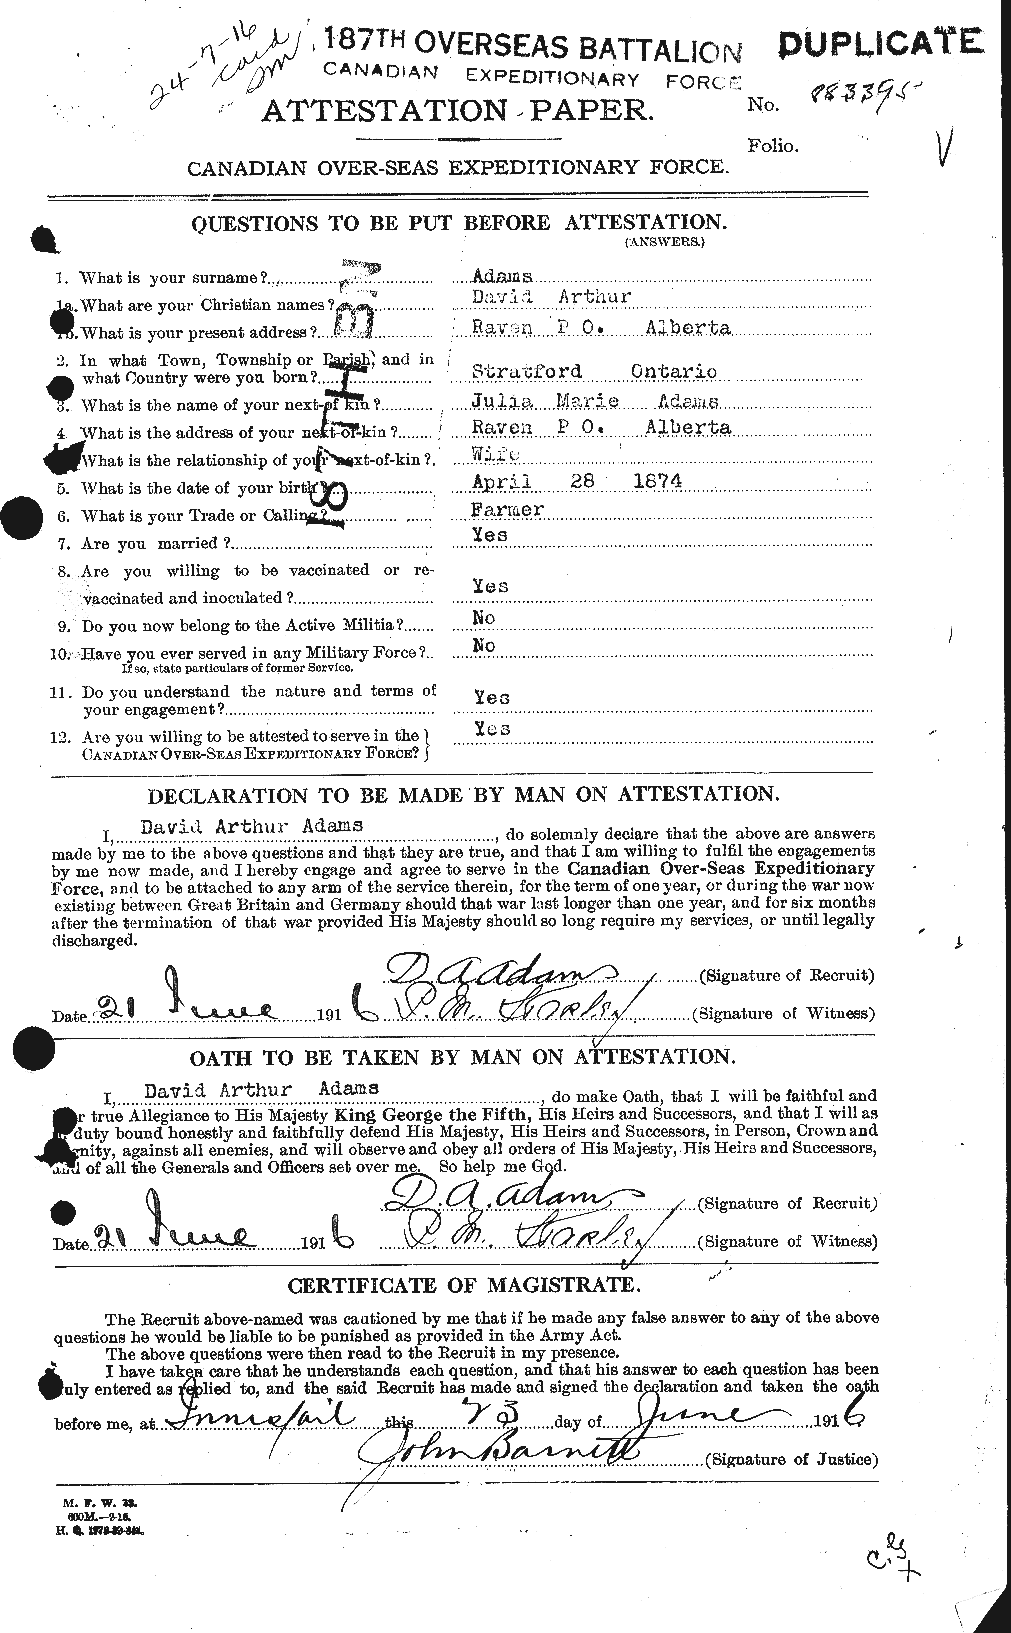 Personnel Records of the First World War - CEF 202655a